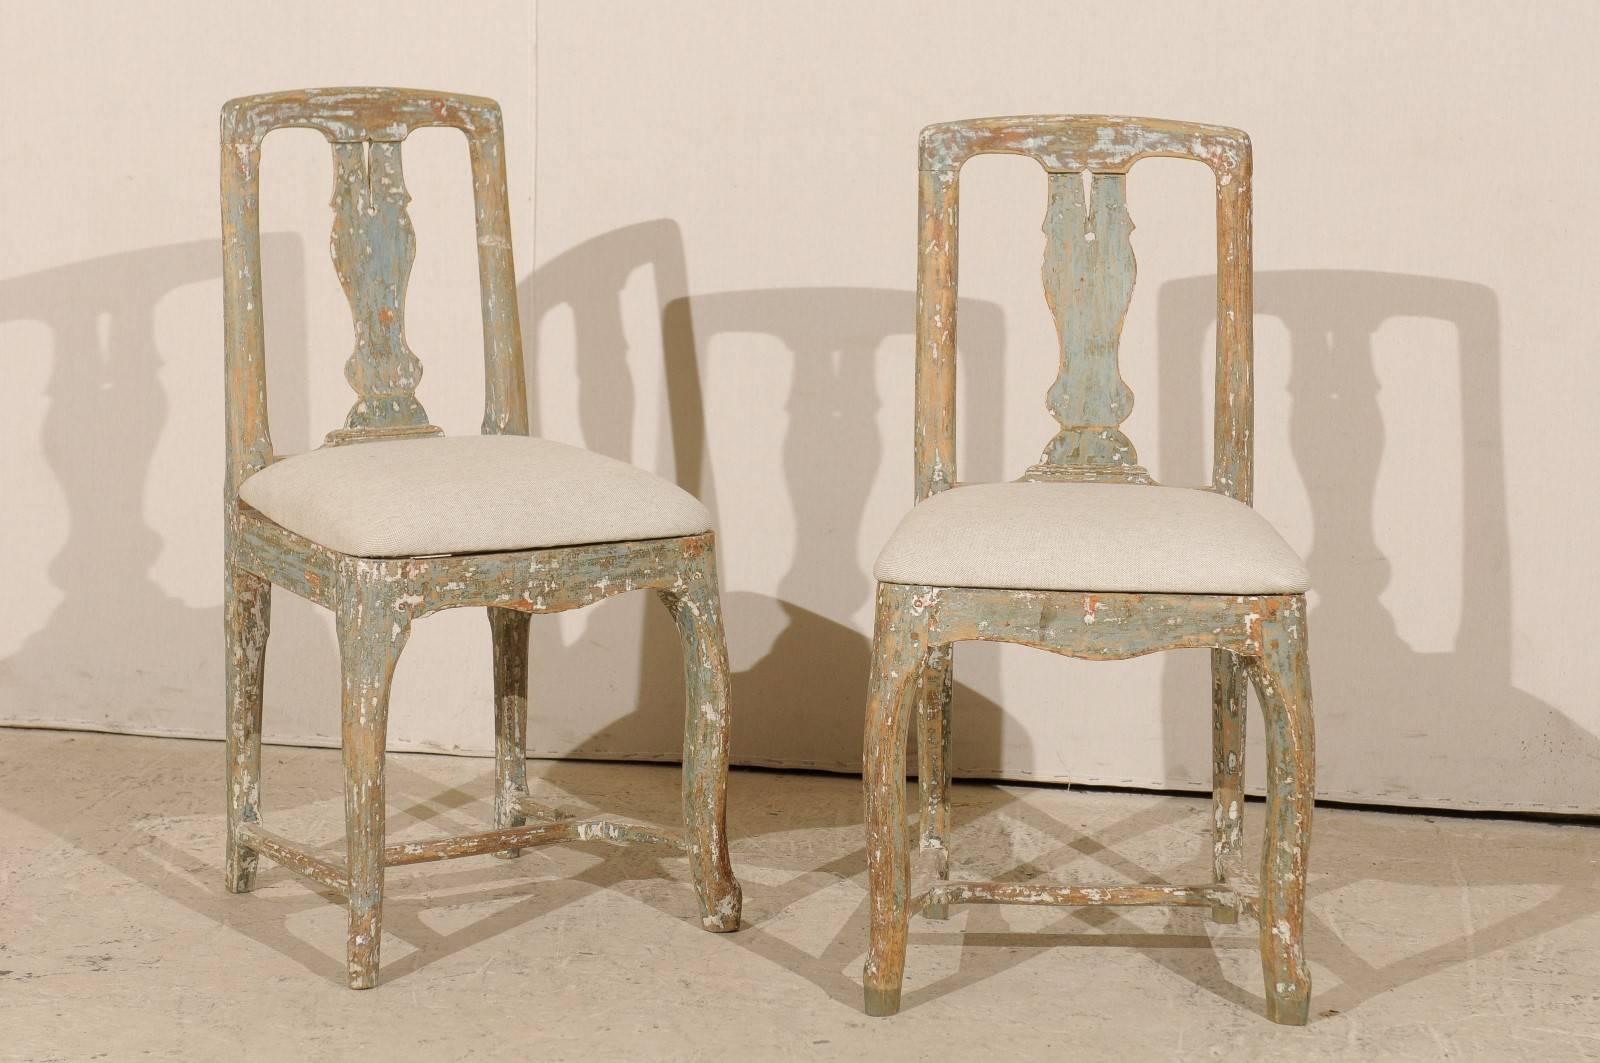 A pair of Swedish mid-18th century period Rococo side chairs. This pair of Swedish chairs features original paint, pierce splats and a cross stretcher at the bottom. The seats have been newly upholstered in a nice, neutral Belgian linen. These side